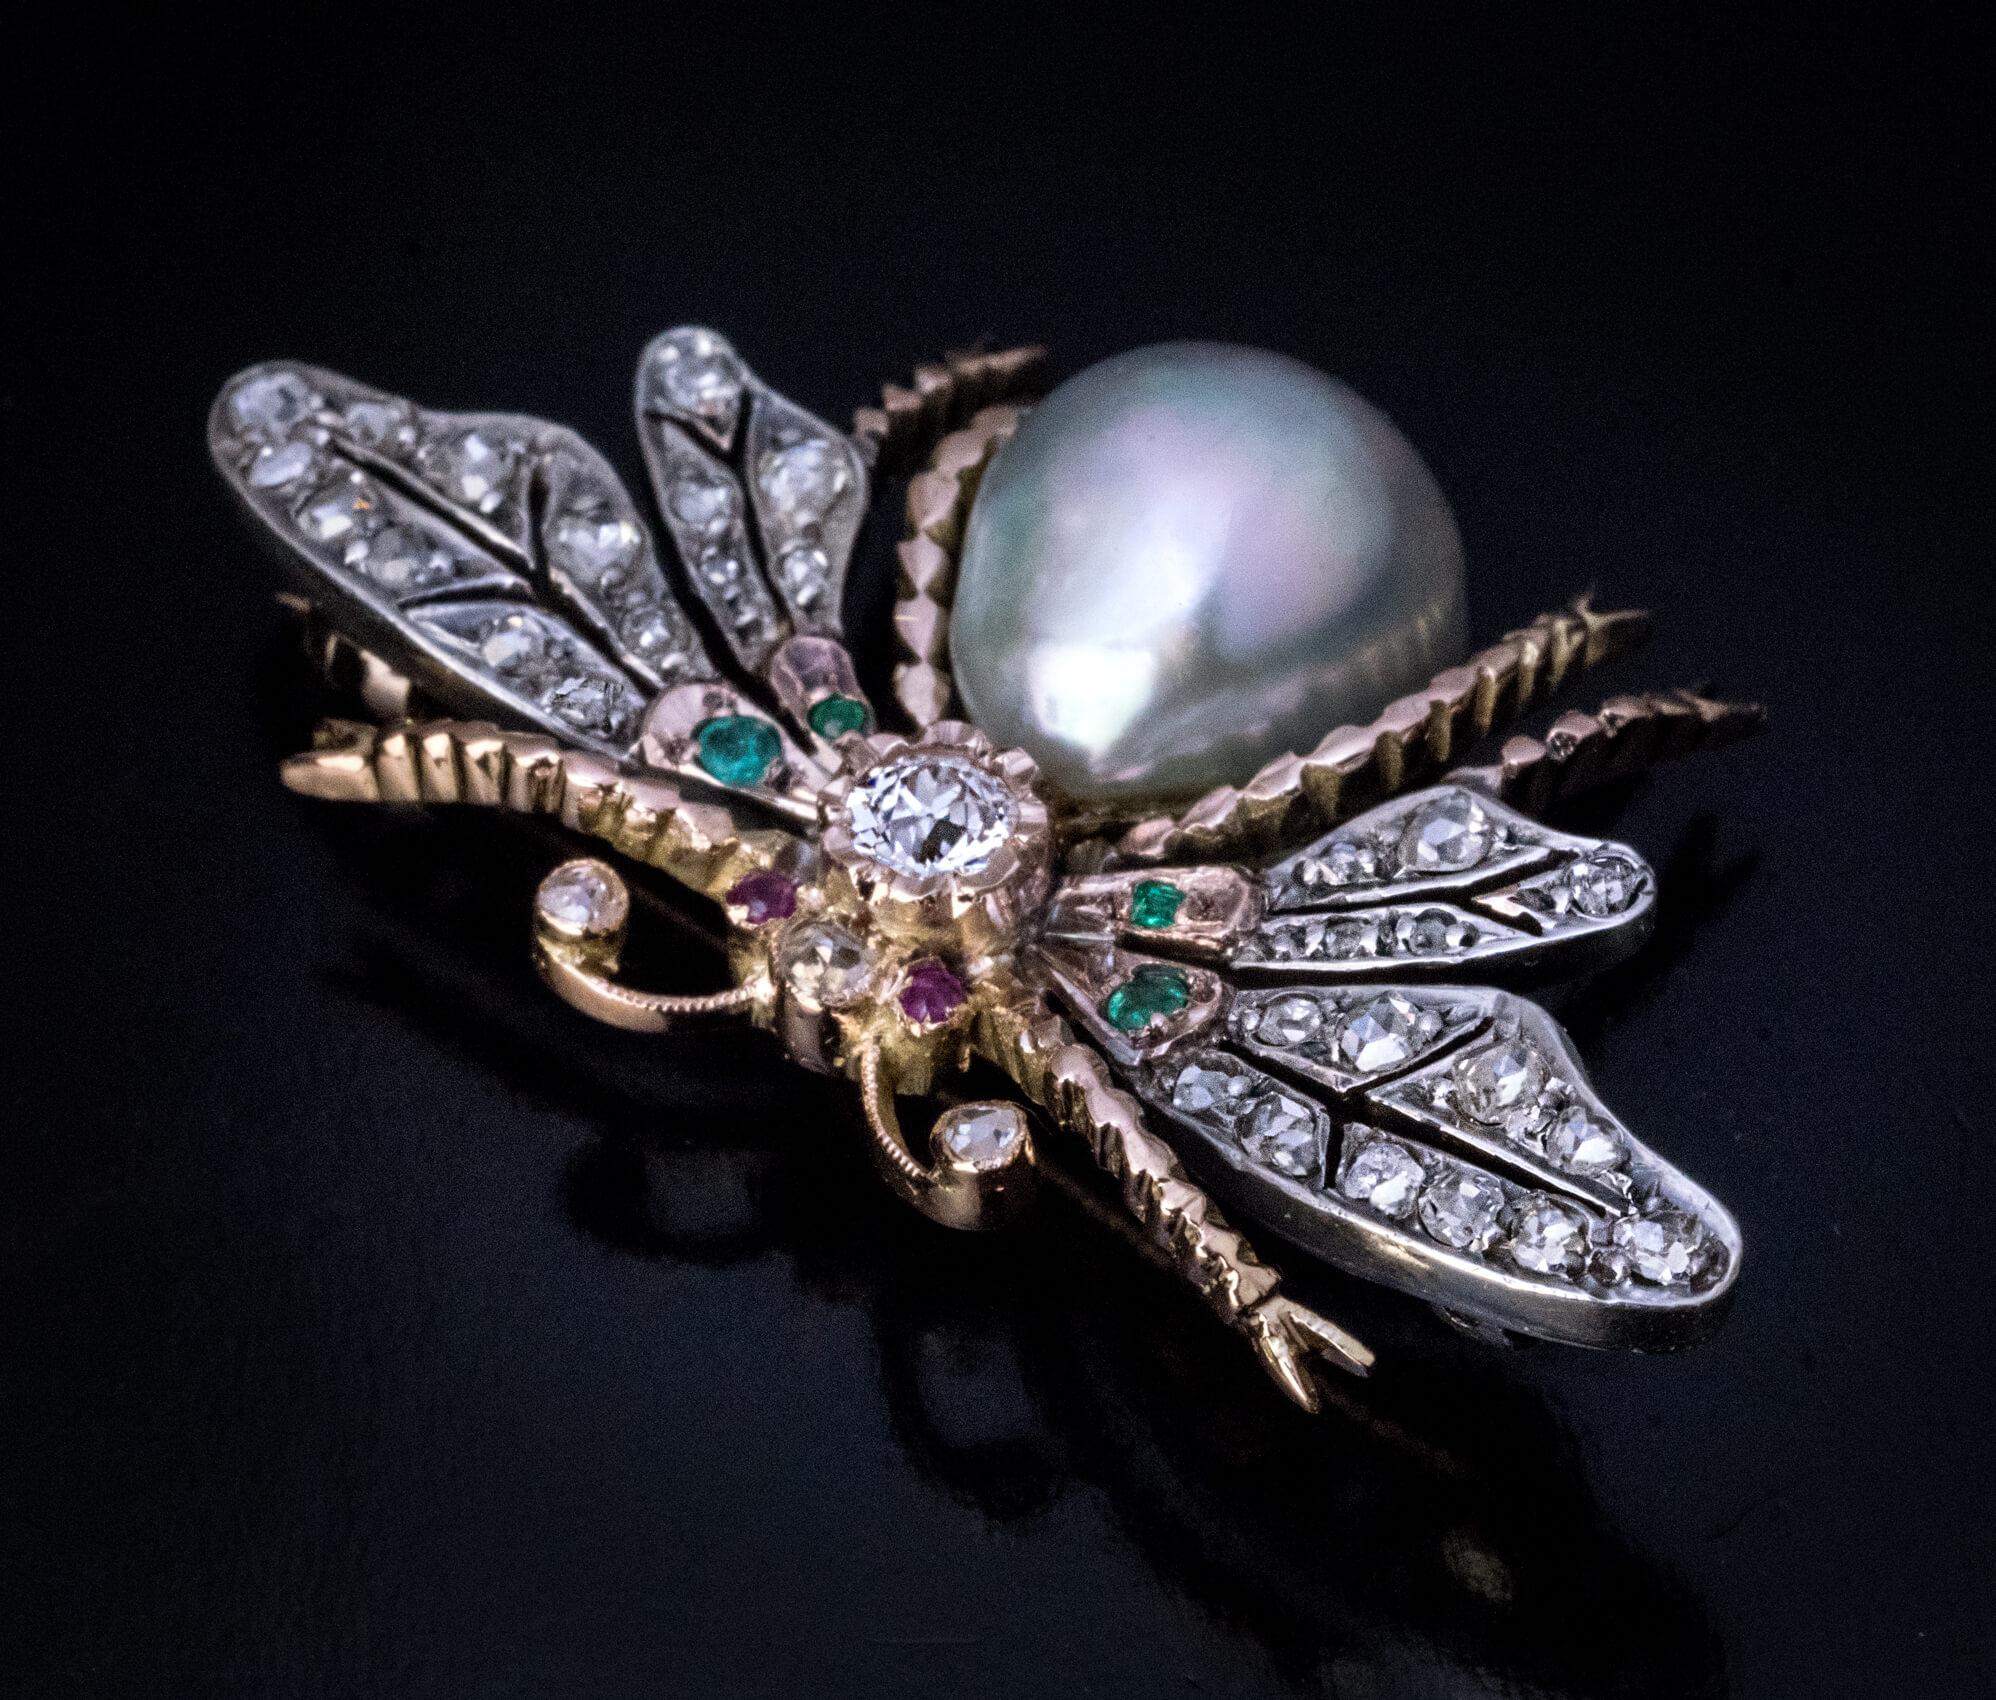 Circa 1890  The brooch is crafted in 14K gold and silver. A large pear shape pearl forms the body. The wings are embellished with old rose cut diamonds and emeralds. The head is highlighted by a sparkling old mine cut diamond. The eyes are set with